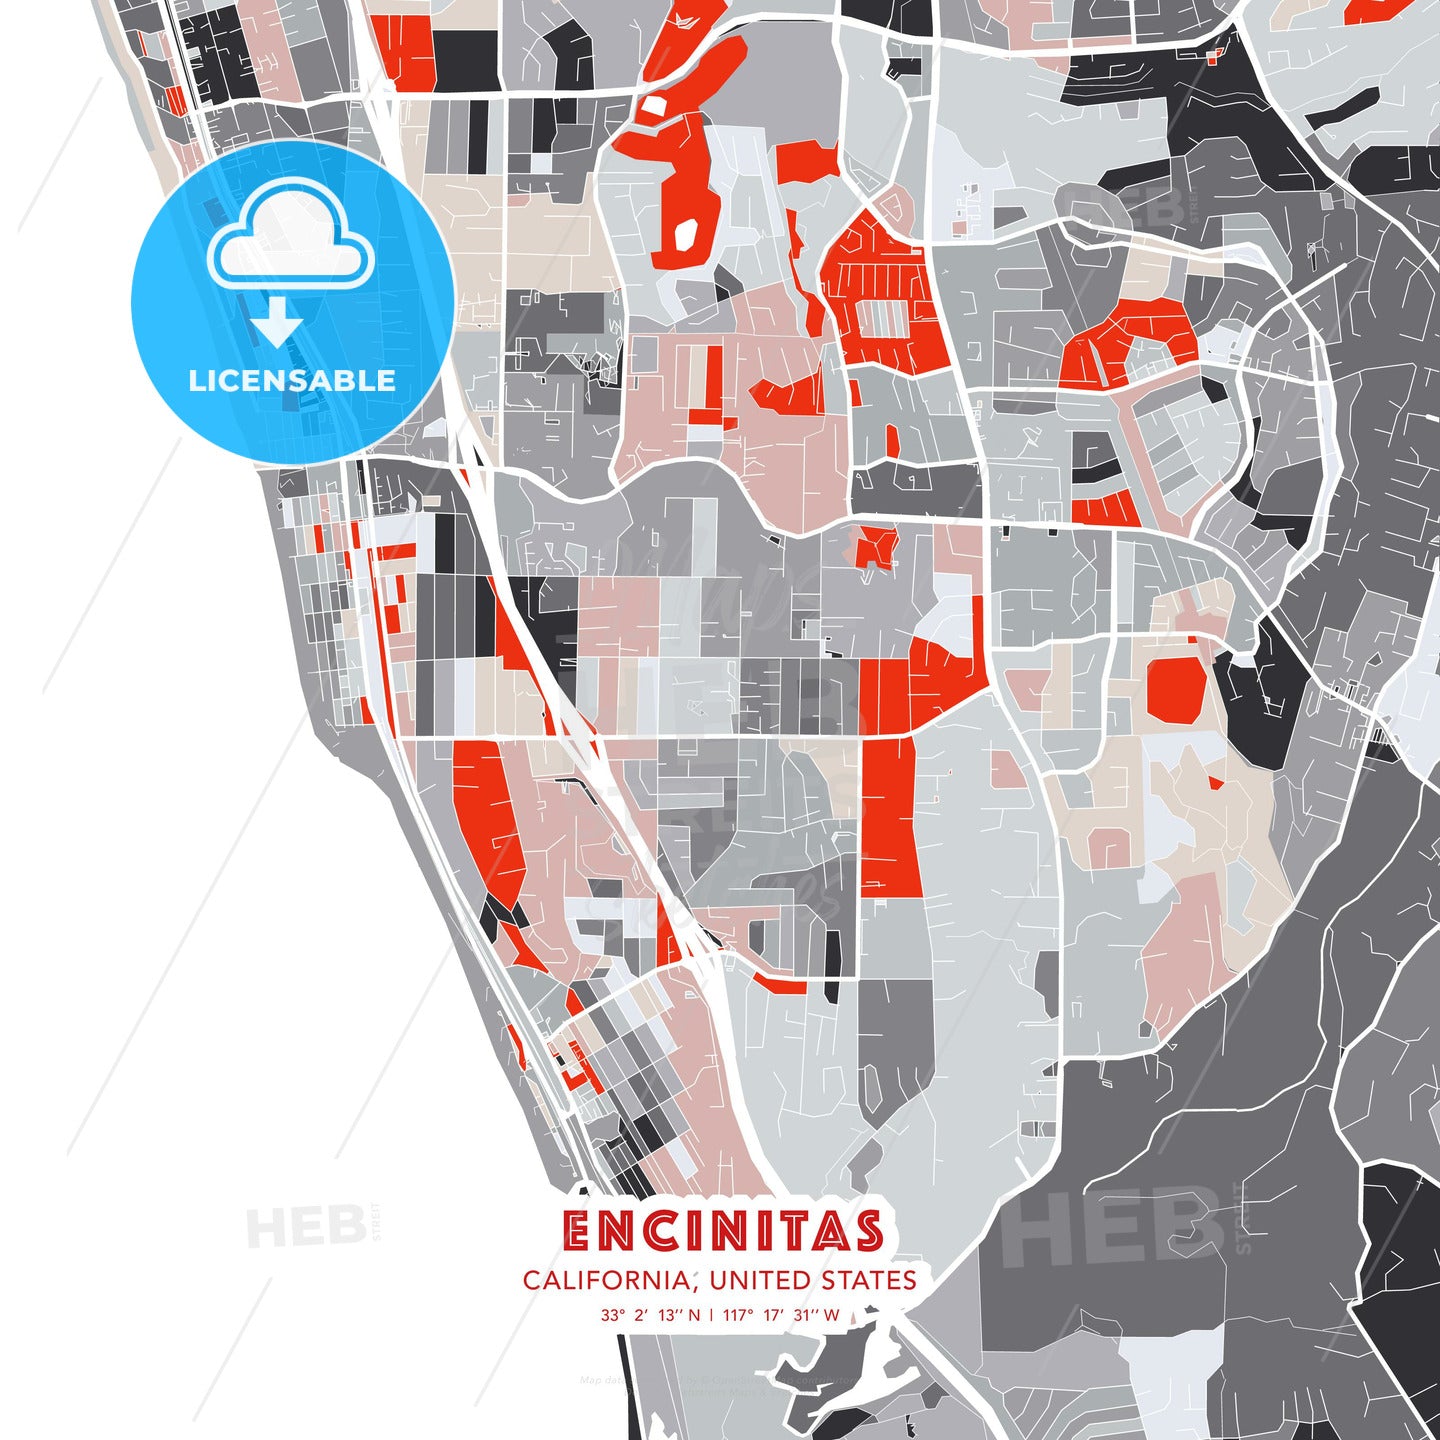 Encinitas, California, United States, modern map - HEBSTREITS Sketches